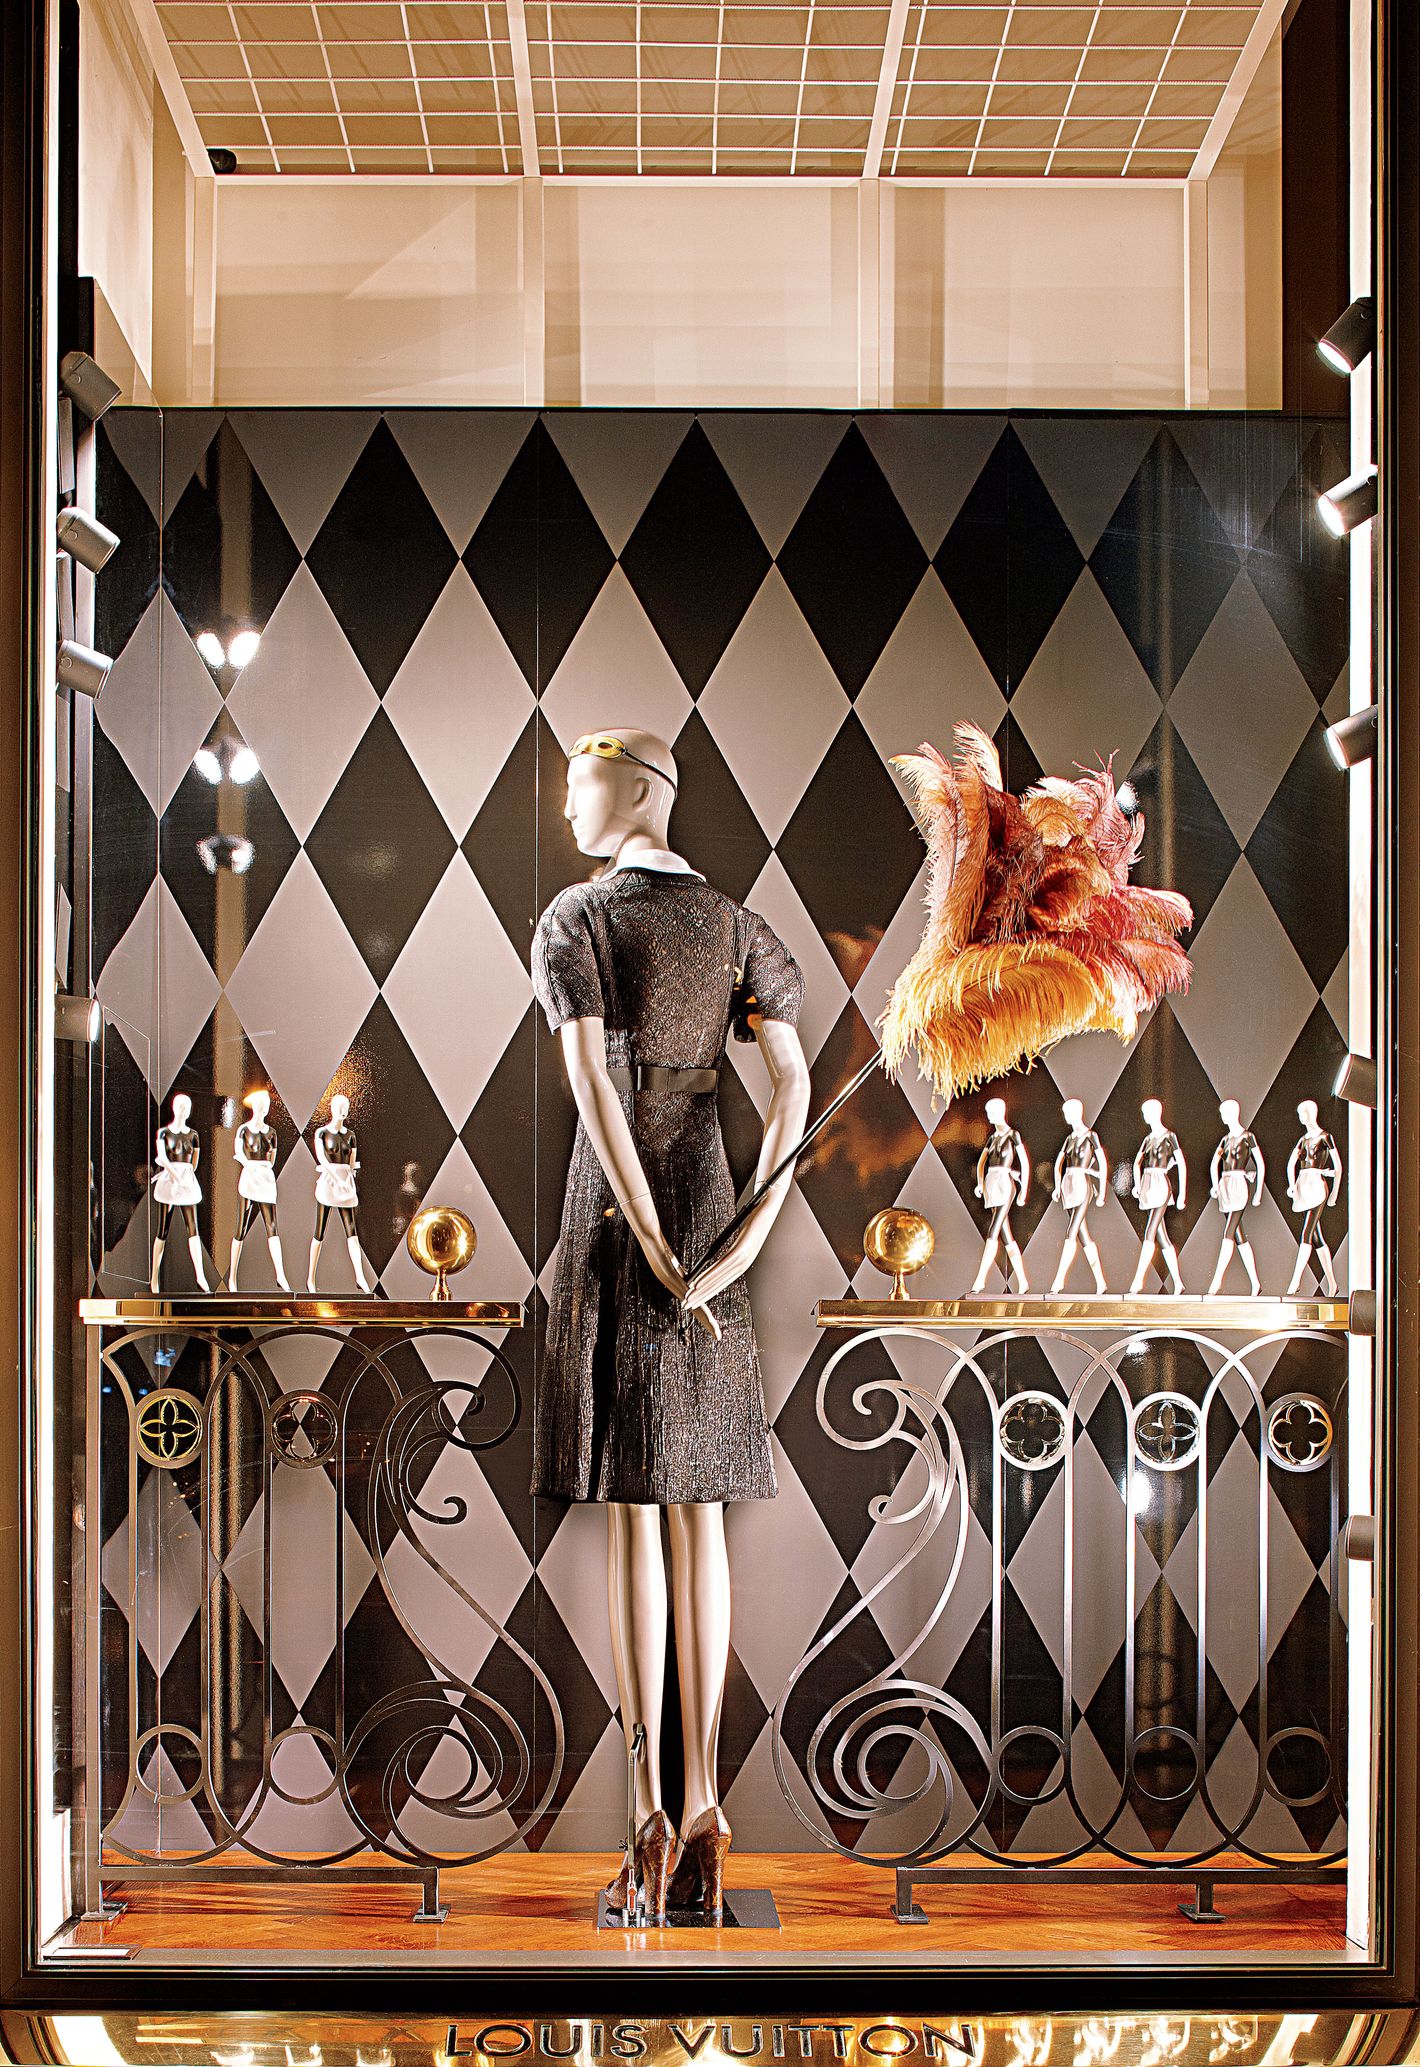 Louis Vuitton Window Signage in NYC - 40 VISUALS